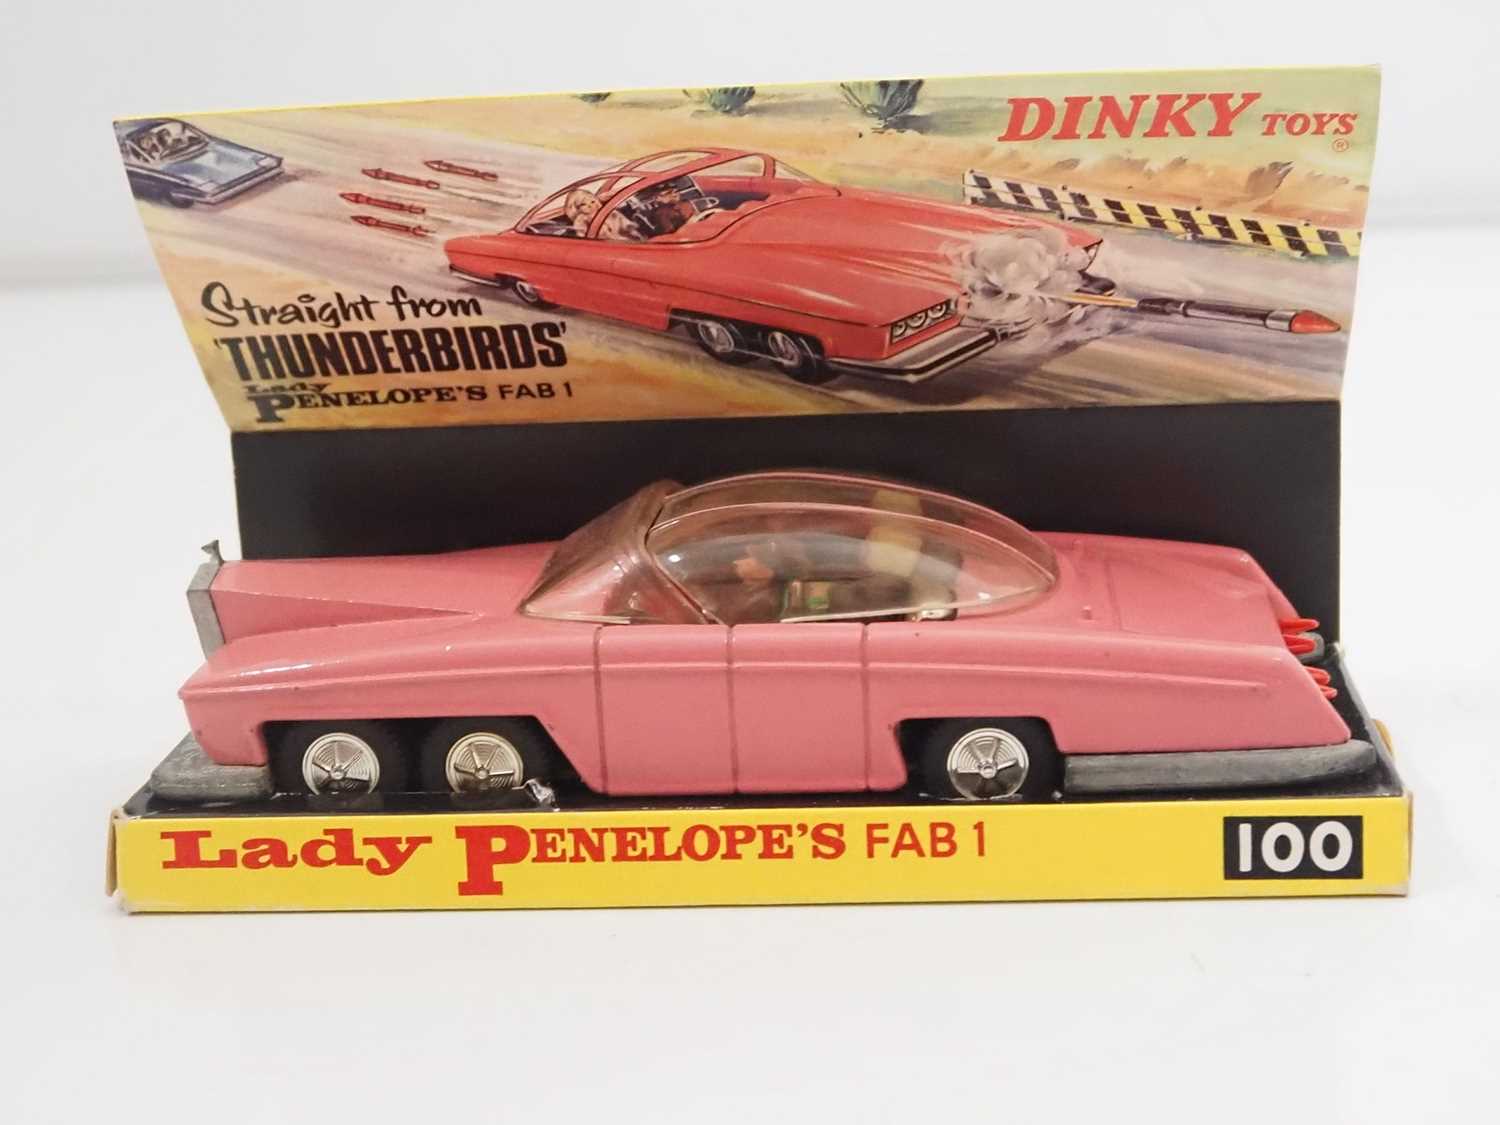 A DINKY 100 diecast 'Gerry Anderson's Thunderbirds' Lady Penelope's FAB1 Rolls Royce in pink, - Image 2 of 5